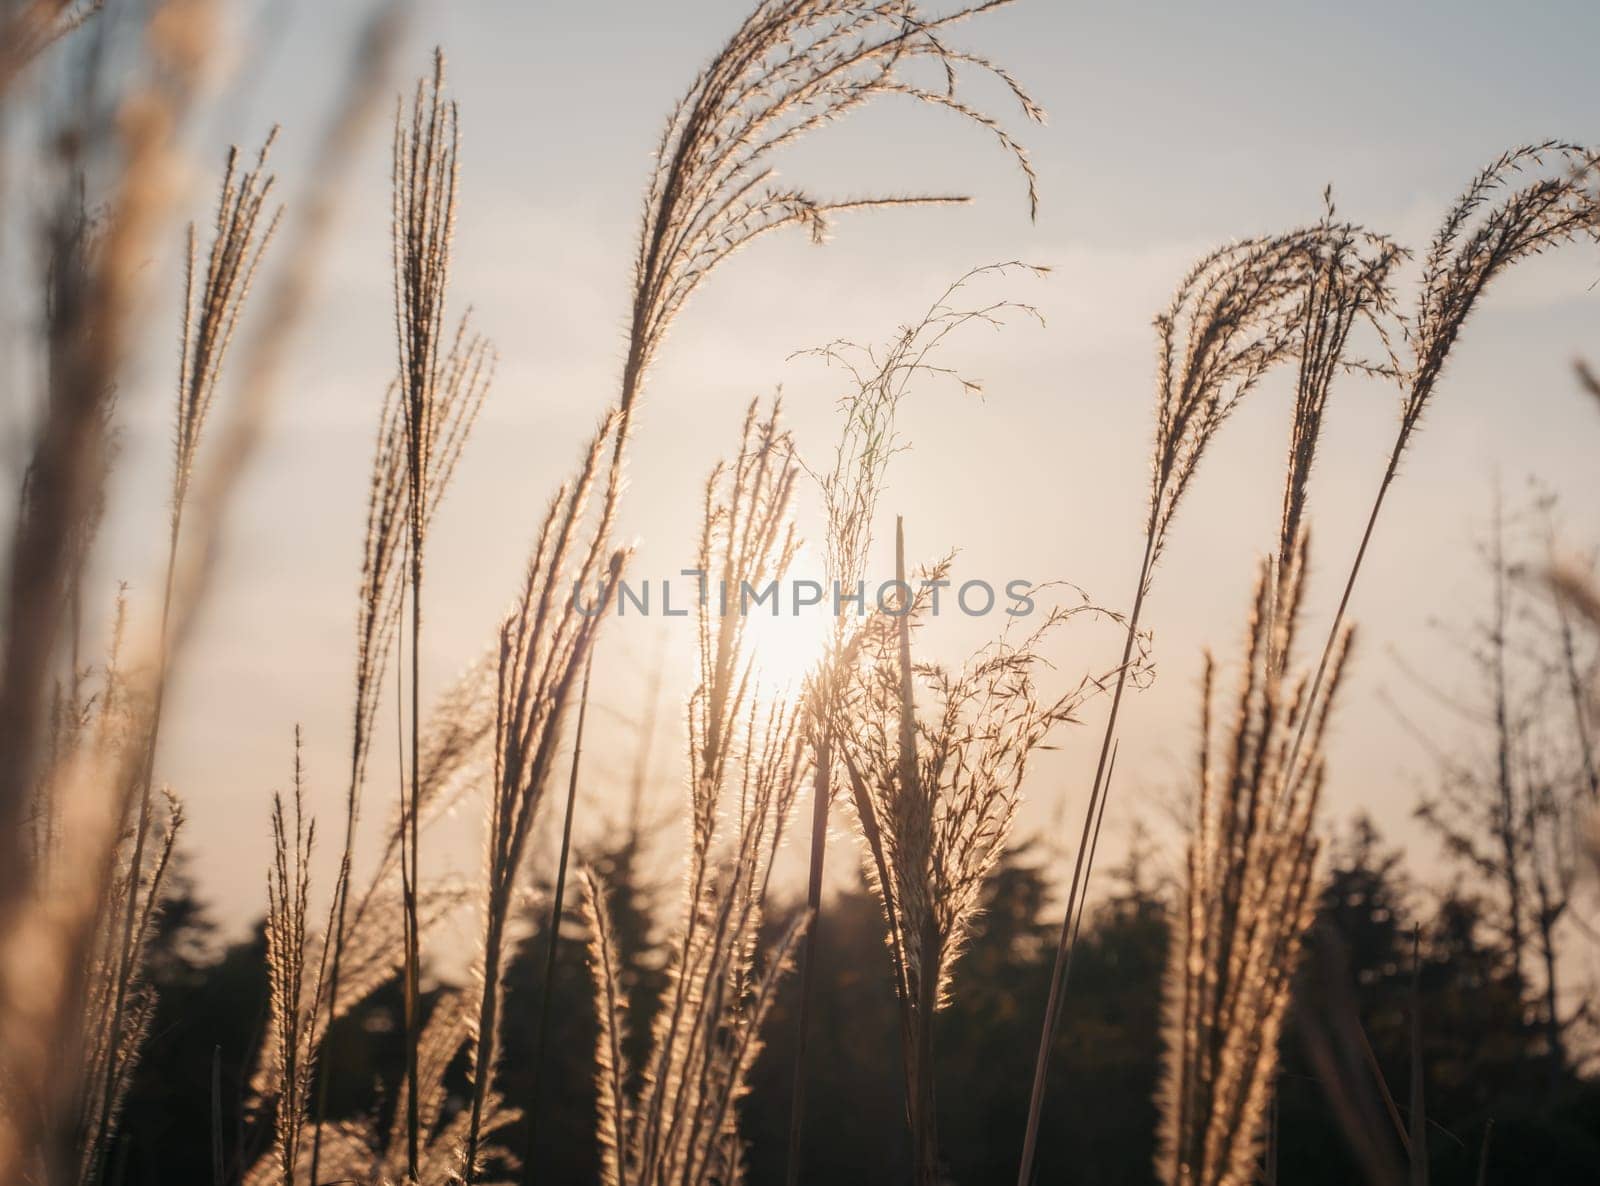 Golden wheat fields at sunset with sunlight filtering through, peaceful rural landscape by Busker